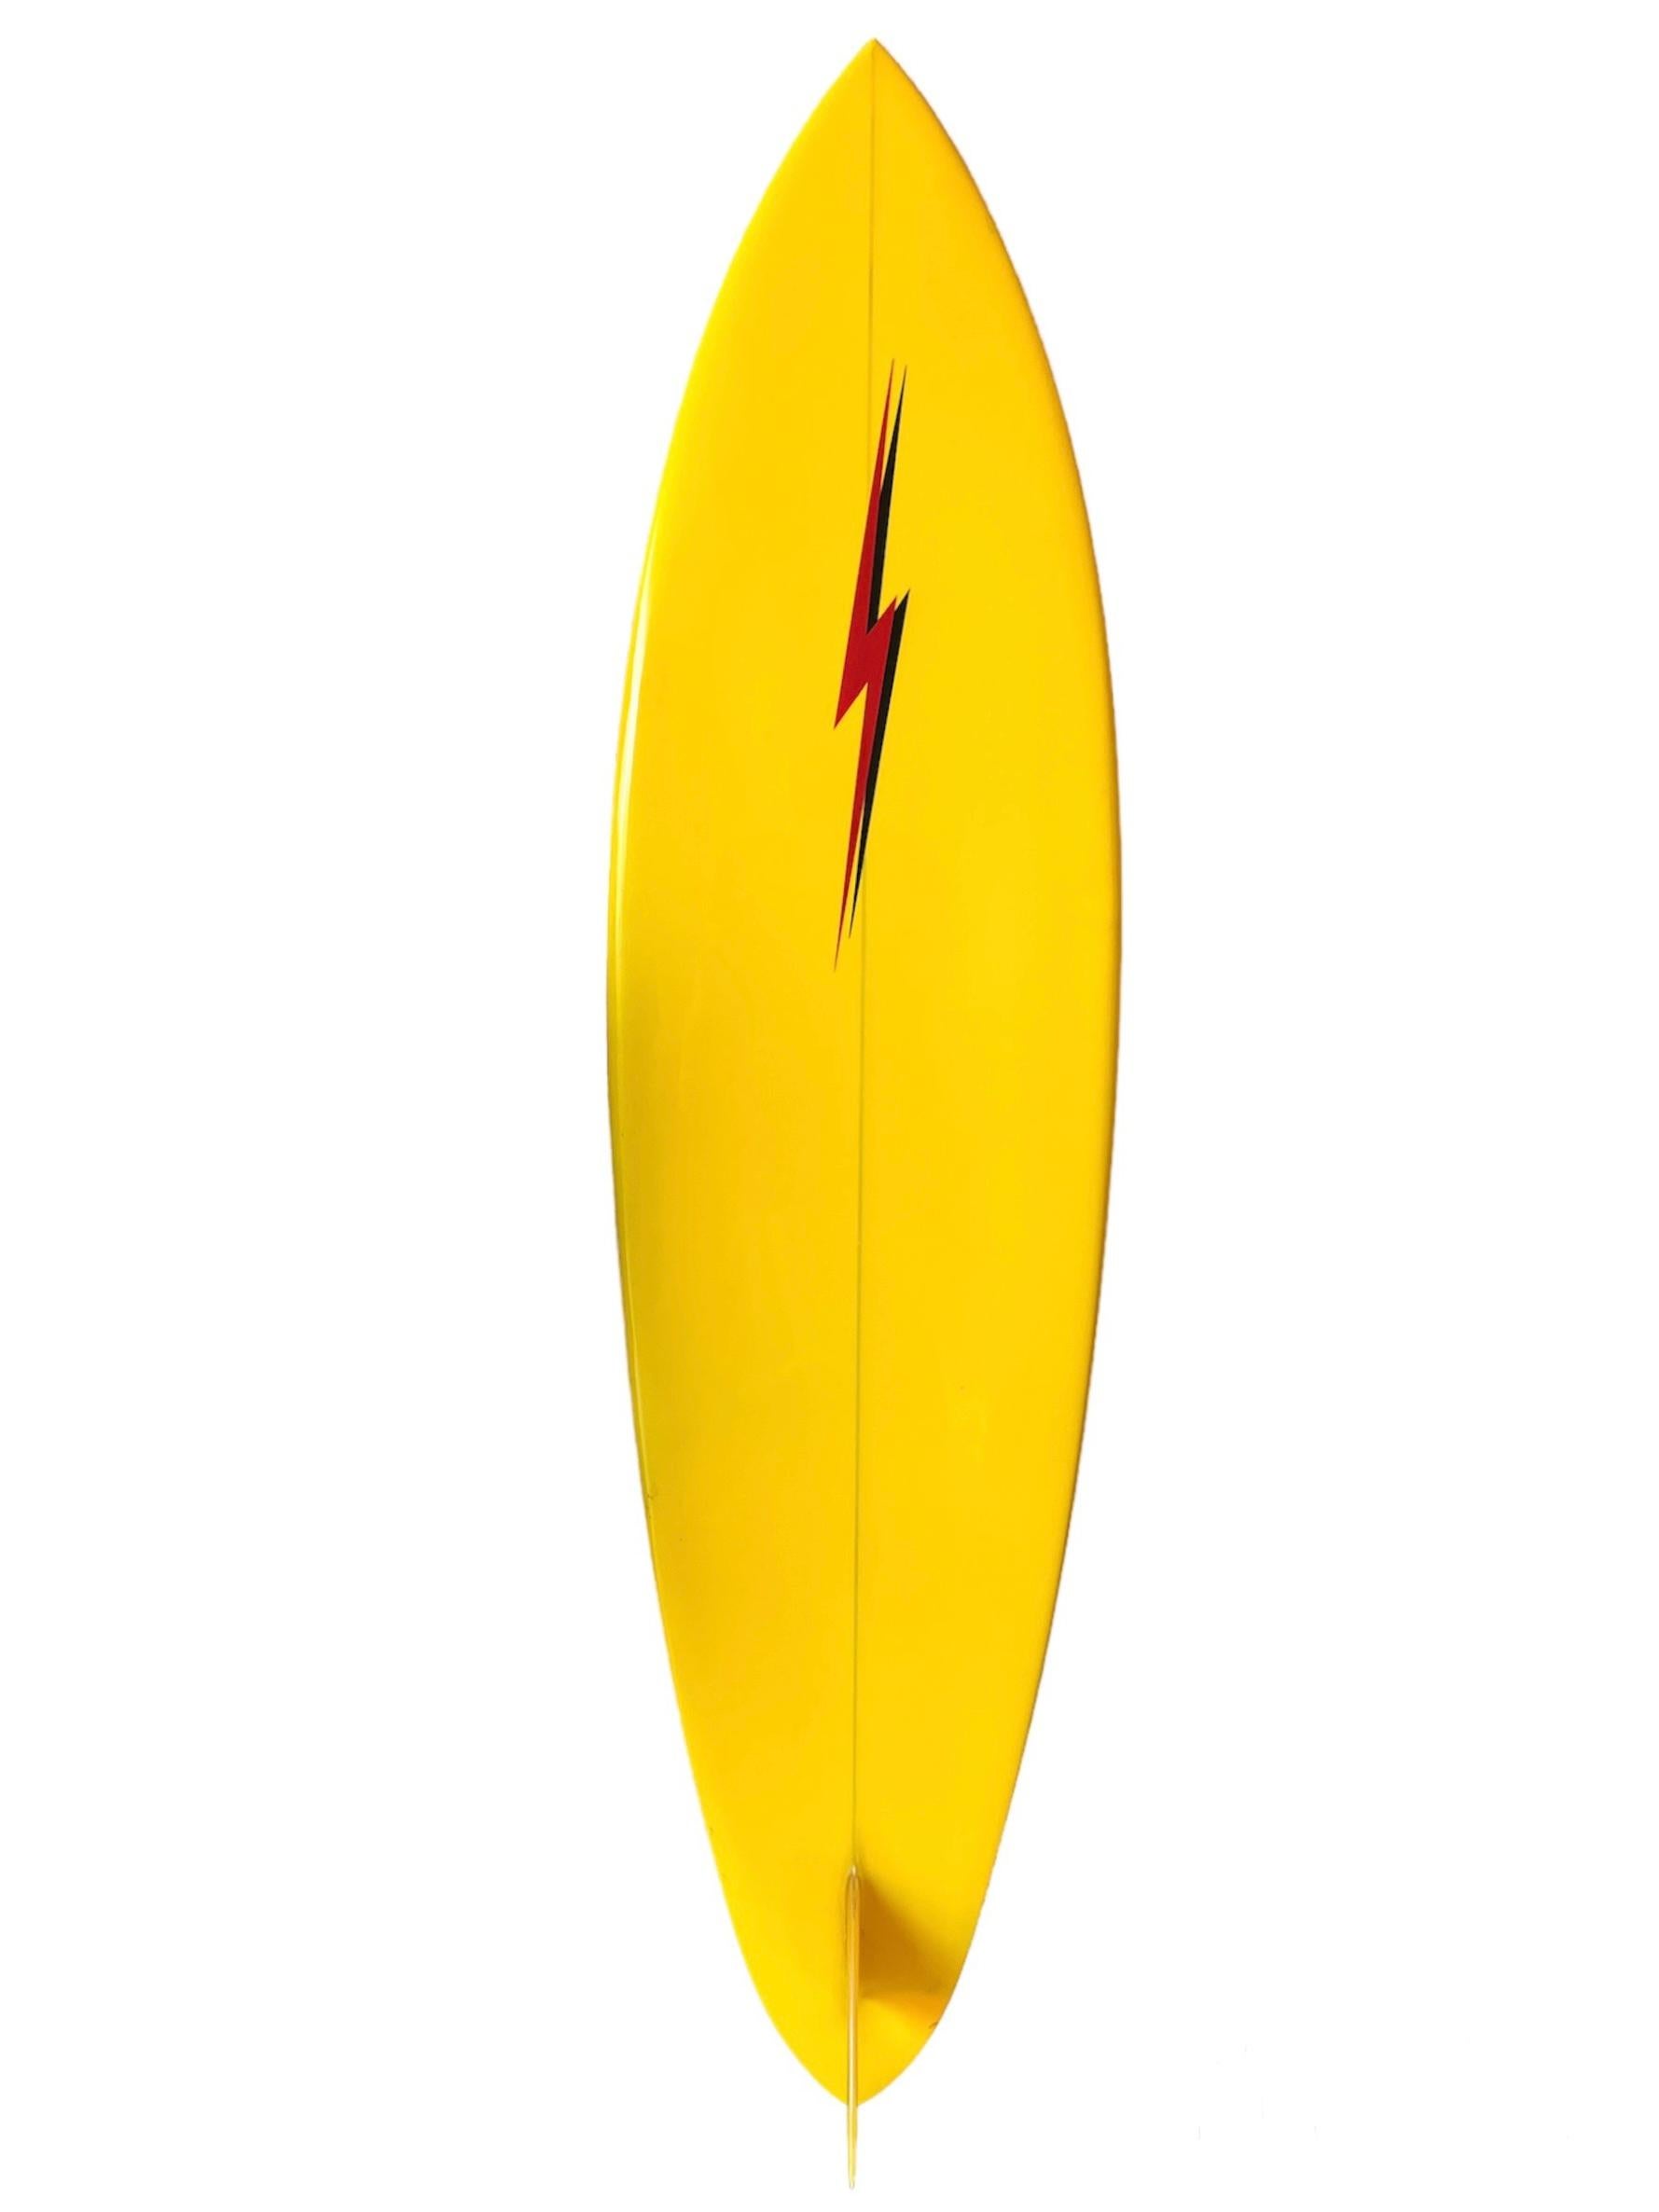 Mid-1970s vintage Lightning Bolt surfboard made by Tom Parrish. Features bright yellow tint with double rail lightning bolt pinstripes. Beautiful red lightning bolt design with complimentary black shadow. A remarkable example of highly coveted 1970s